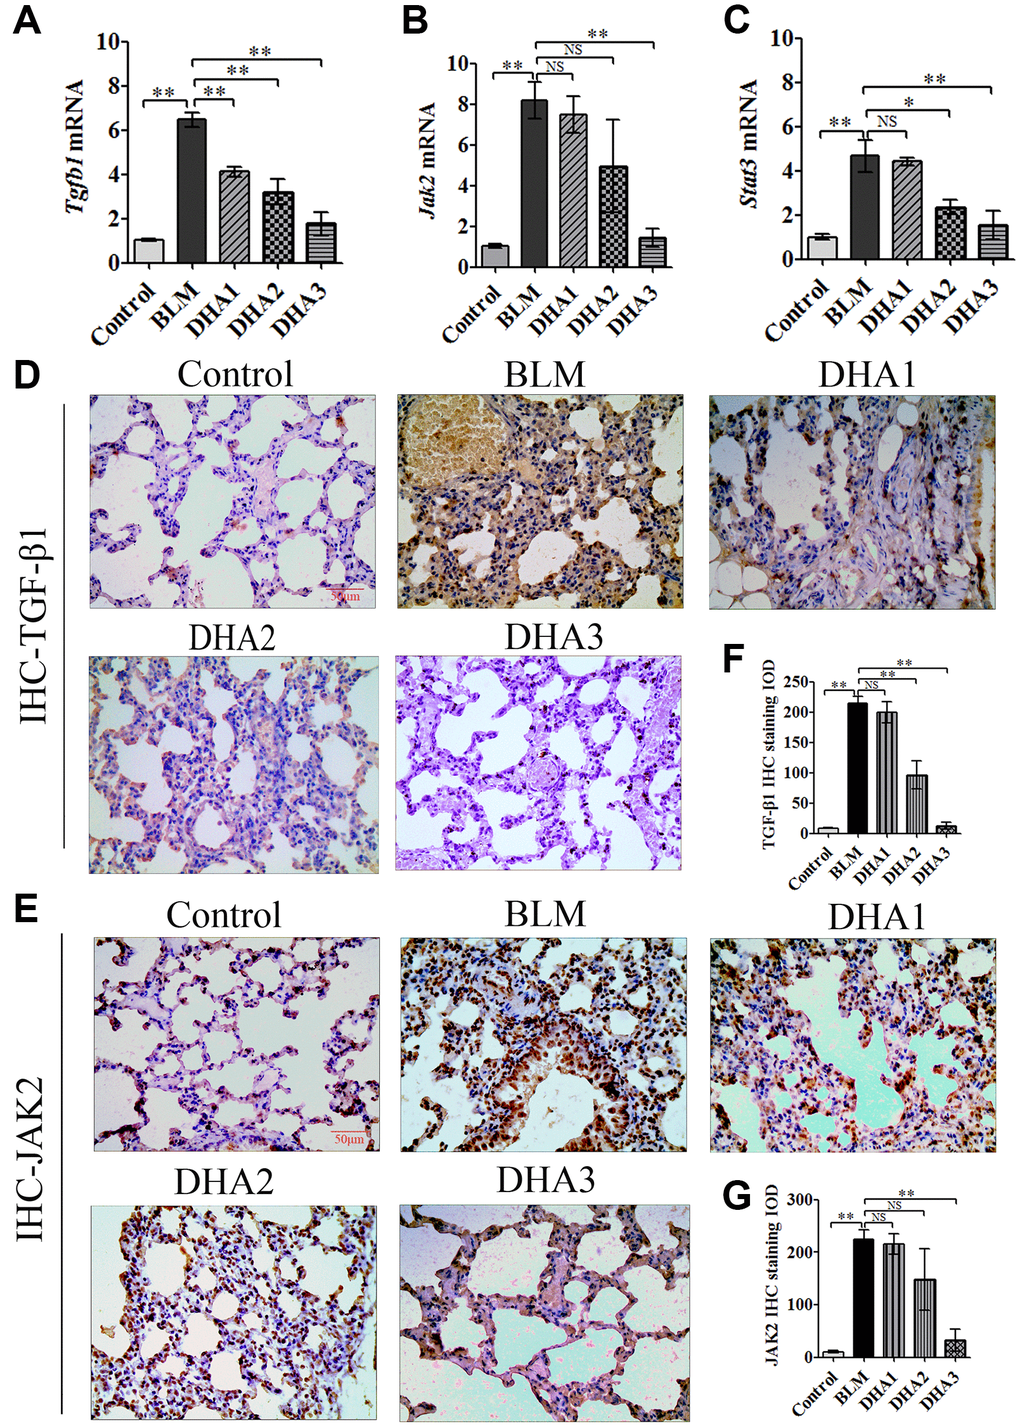 DHA inhibited the JAK2/STAT3 pathway in pneumonia tissue. (A) Tgfb1, (B) Jak2, and (C) Stat3 mRNA levels in the lungs were determined using qRT-PCR (n = 6), data are expressed as the fold change in mRNA expression normalized to Gapdh expression, with respect to the control group. Representative images of (D) TGF-β1 and (E) JAK2 protein expression in lung tissue detected using IHC. Mean IOD of (F) TGFβ1 and (G) JAK2 protein by IHC staining. Data are expressed as the means ± standard error. *P **P 